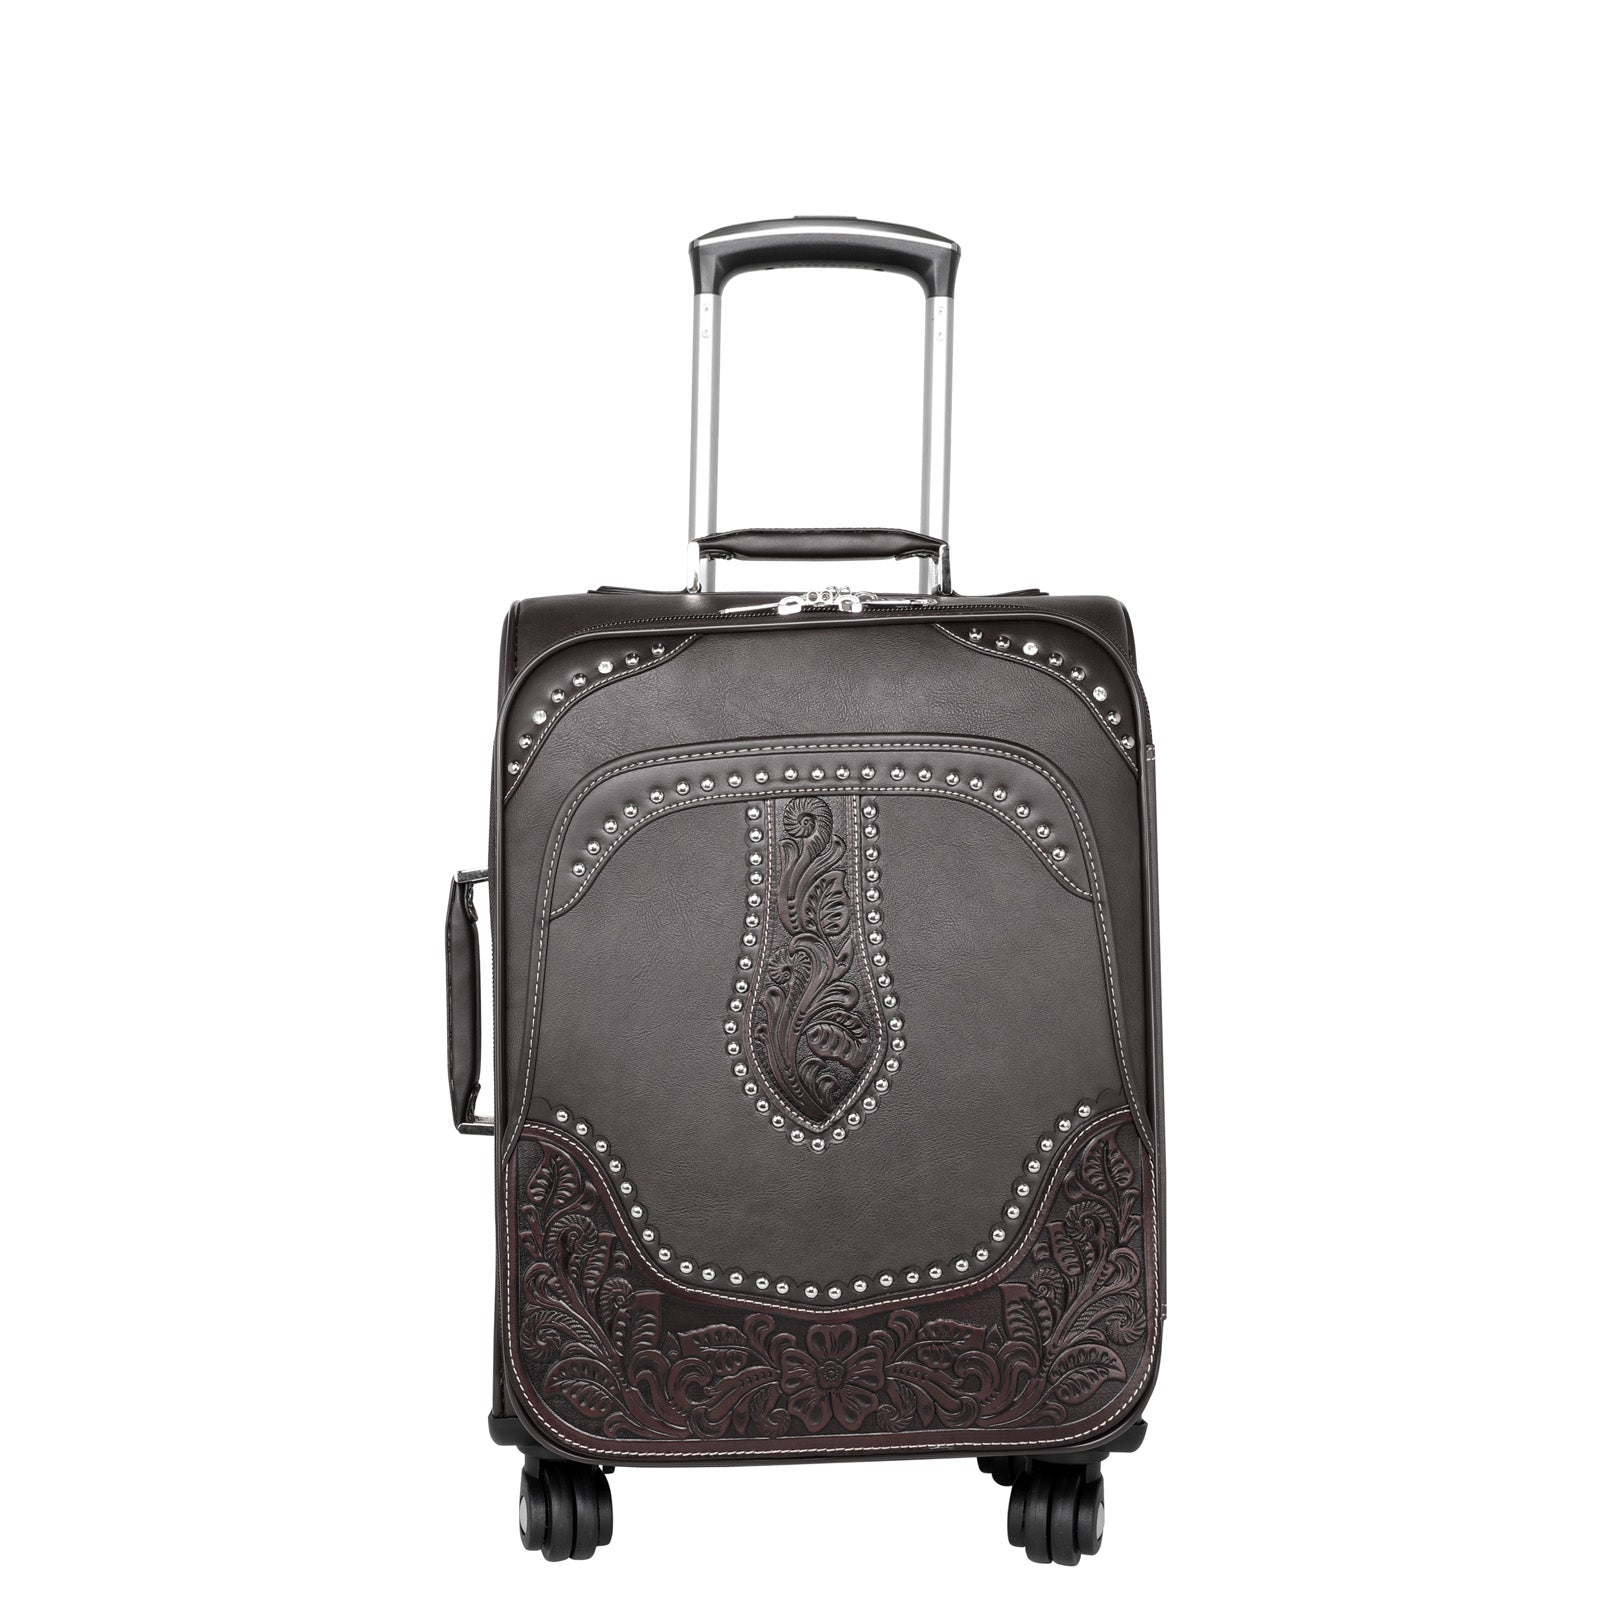 WRL-L1/2/3 Montana West Tooled Leather Collection 3 PC Luggage Set - B